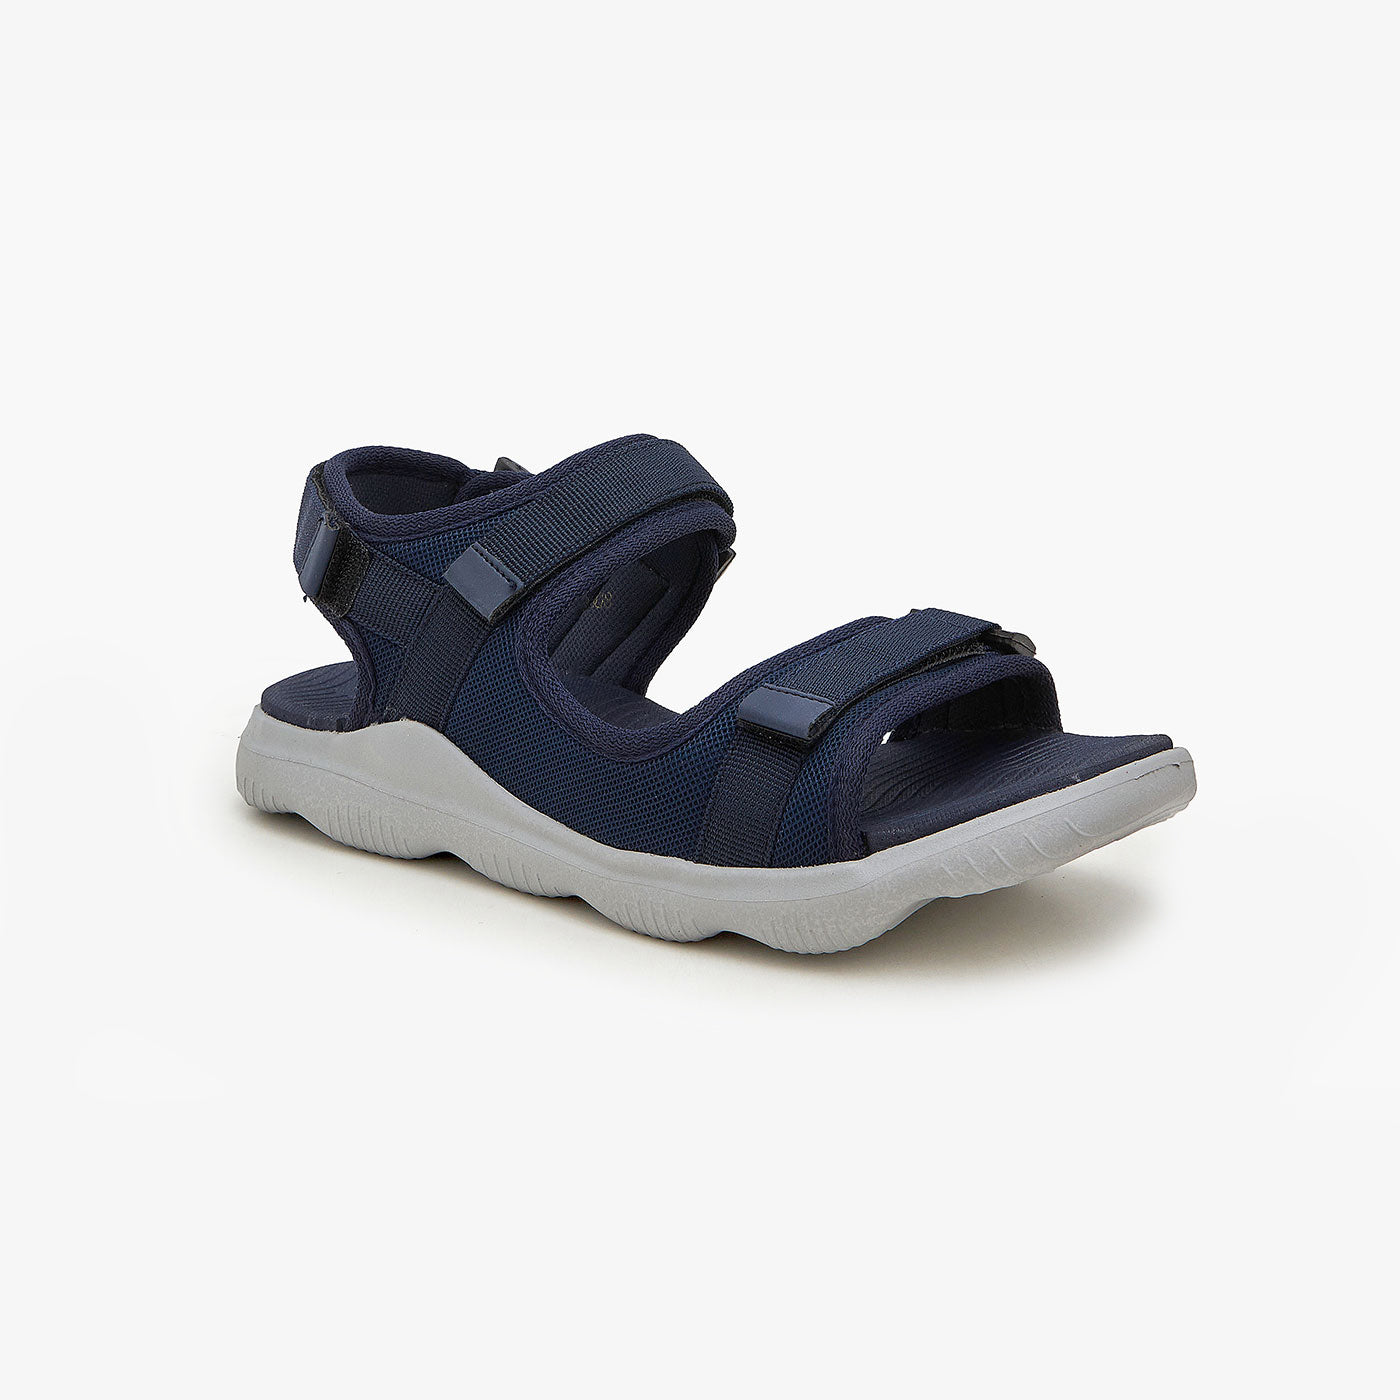 Buy NVY/GRY Smart Sandals for Men – Ndure.com